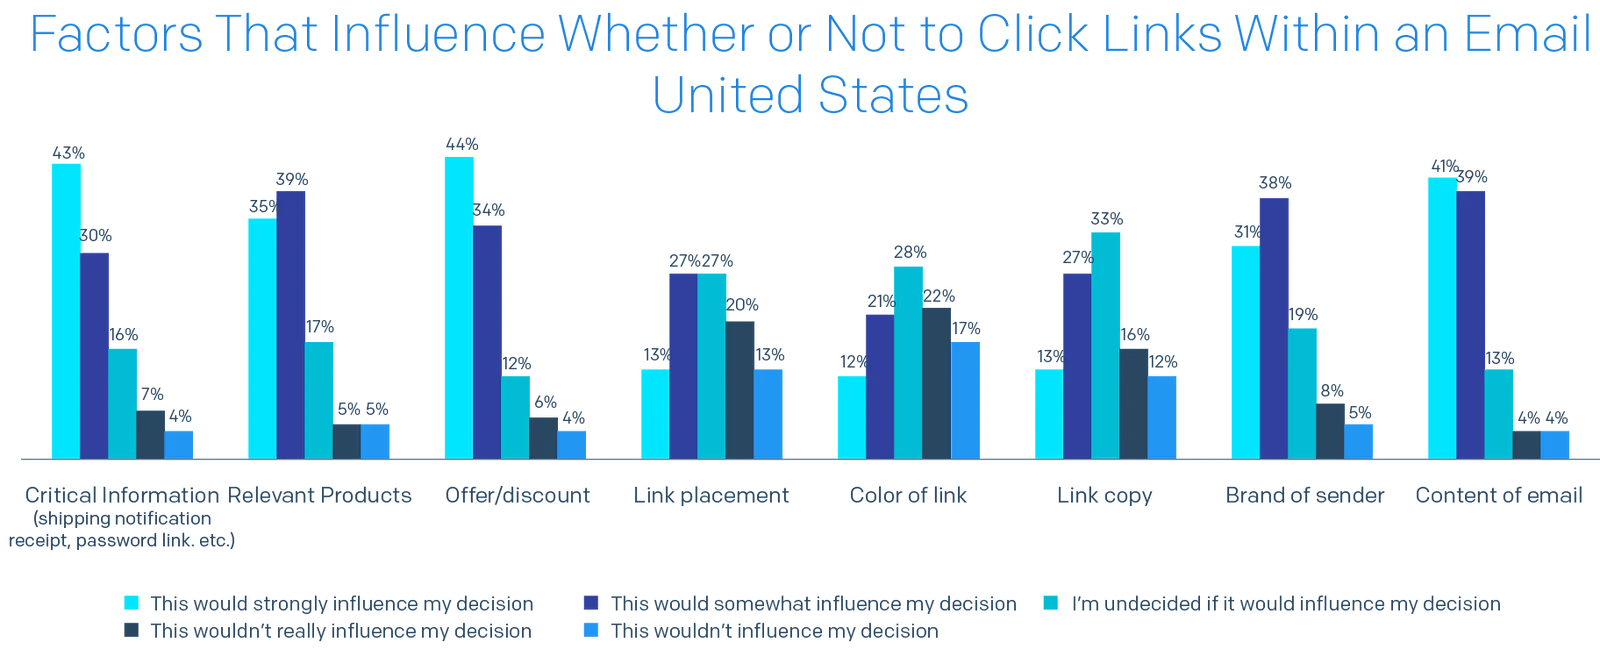 Bar chart of Factors That Influence Whether or Not to Click Links Within an Email in the United States